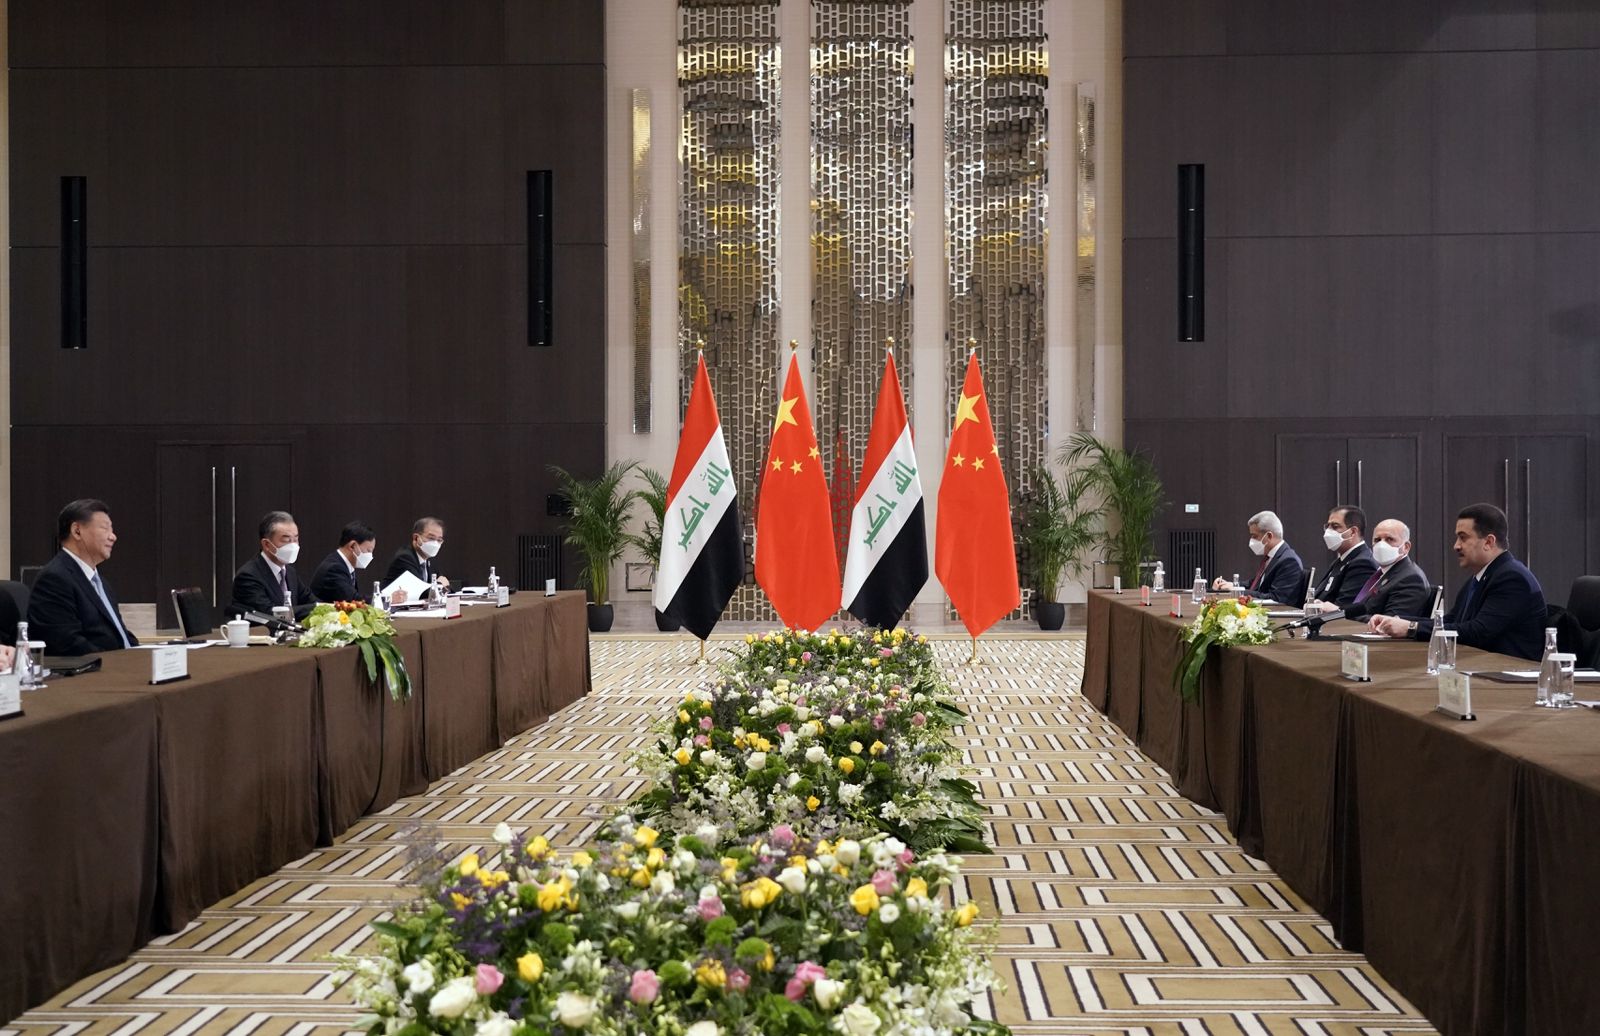 Iraq's PM and China's President explore cooperation prospects in Riyadh